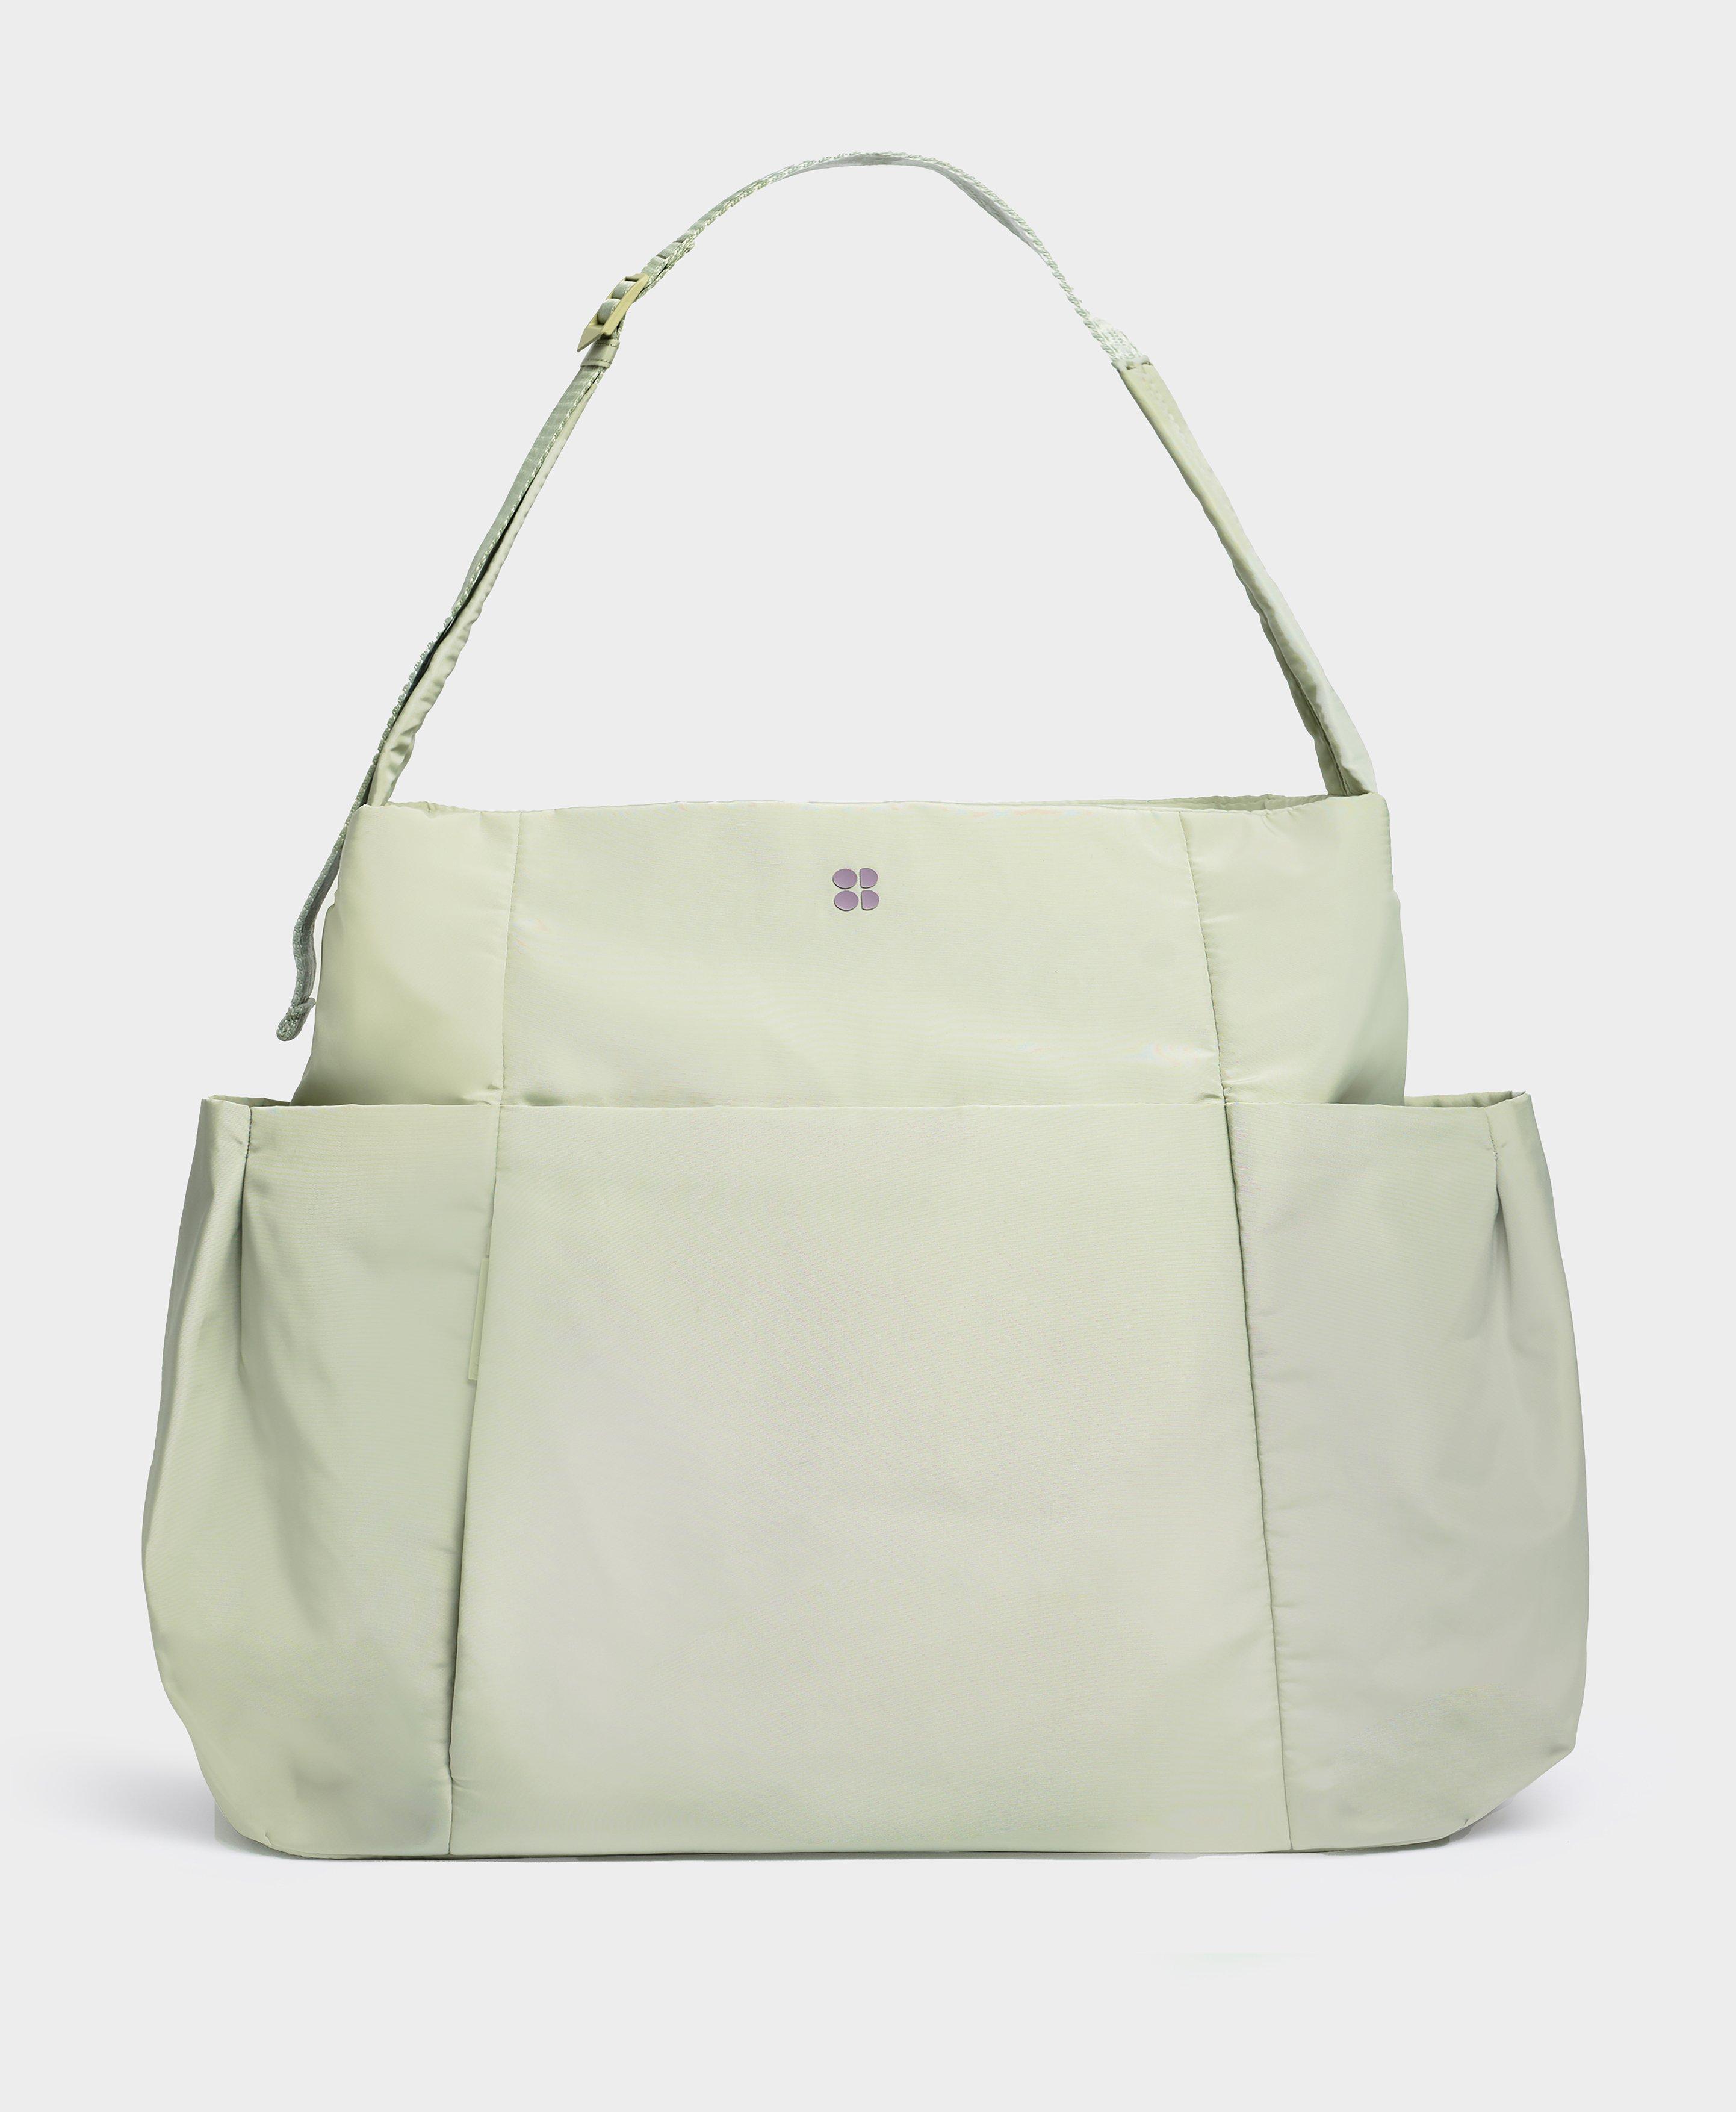 Sweaty Betty East Dulwich - This stylish tote bag can be yours for